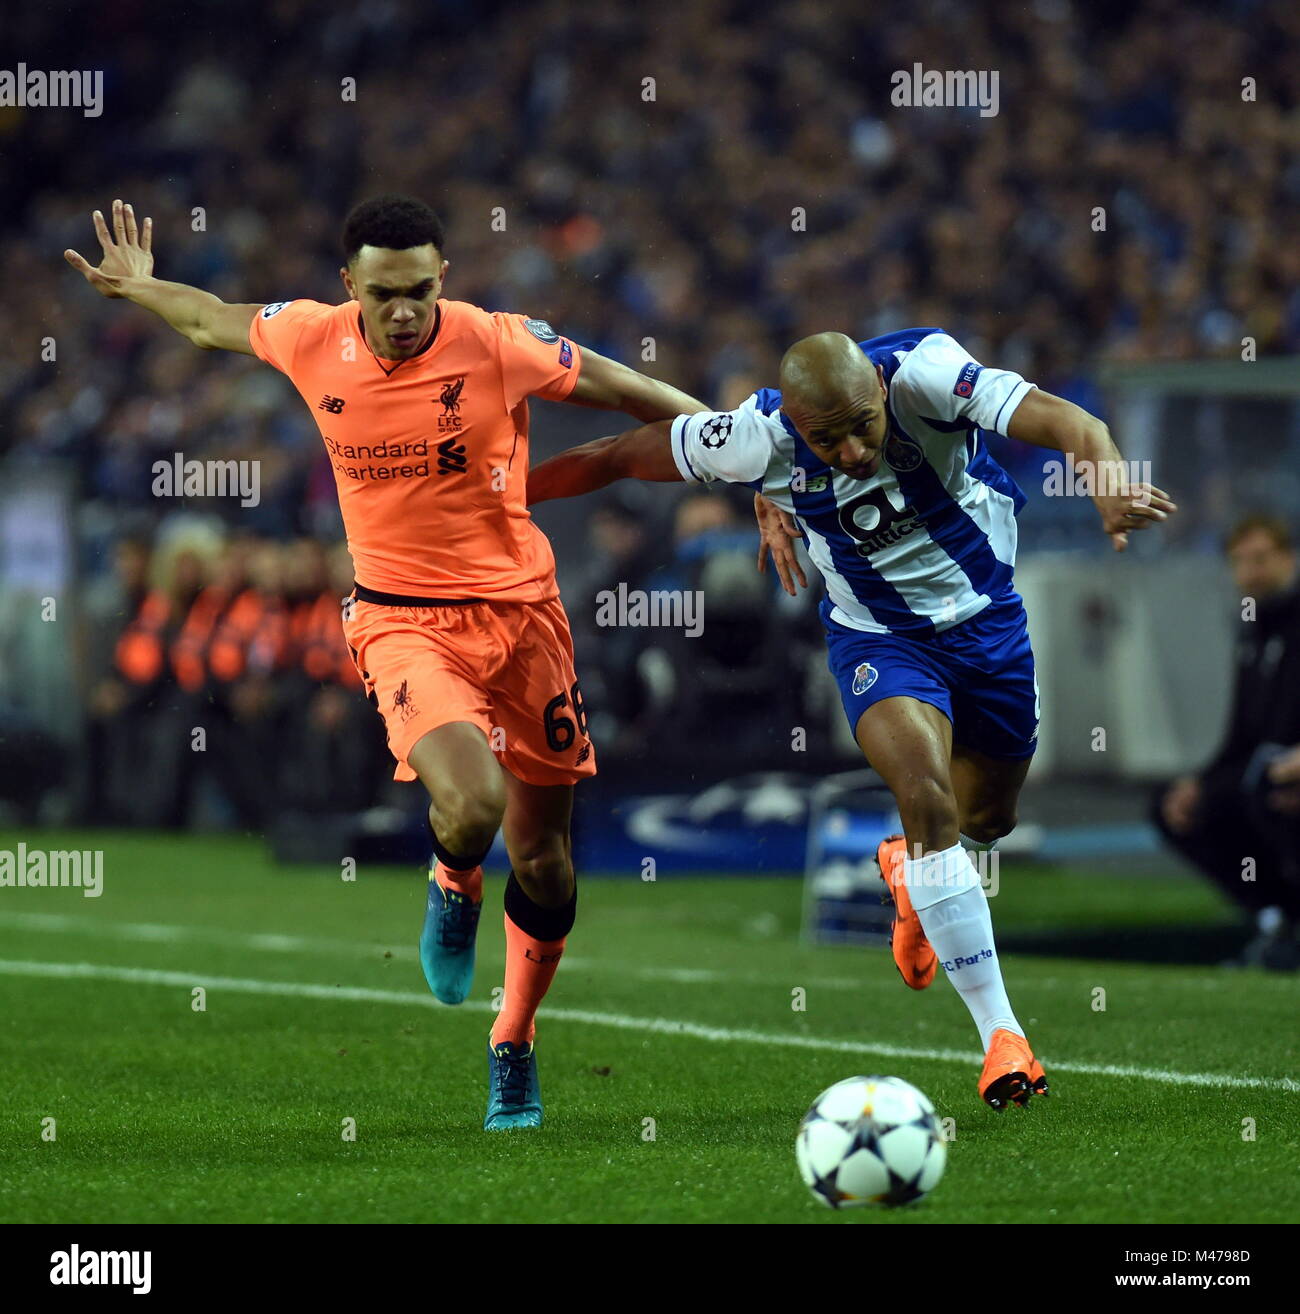 Porto. 14th Feb, 2018. Yacine Brahimi (R) of Porto vies with Alexander-Arnold of Liverpool during the European Champions League soccer match between FC Porto and Liverpool FC at Dragon stadium in Porto, Portugal on Feb. 14, 2018. Liverpool won 5-0. Credit: Zhang Yadong/Xinhua/Alamy Live News Stock Photo